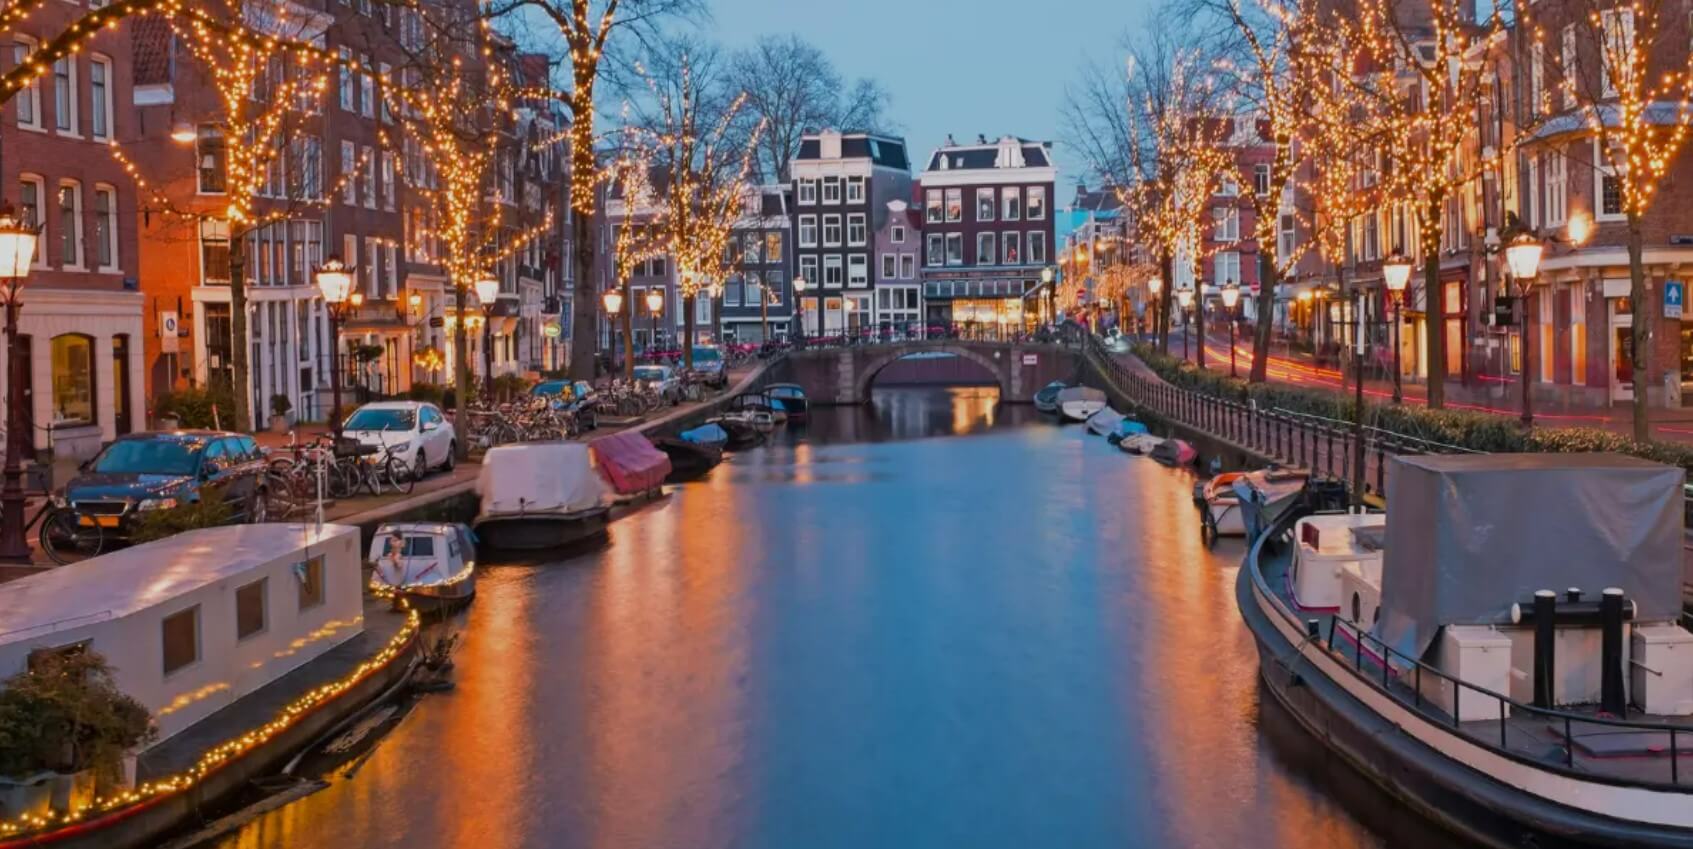 amsterdam canal in the nighttime with fairy lights on the trees